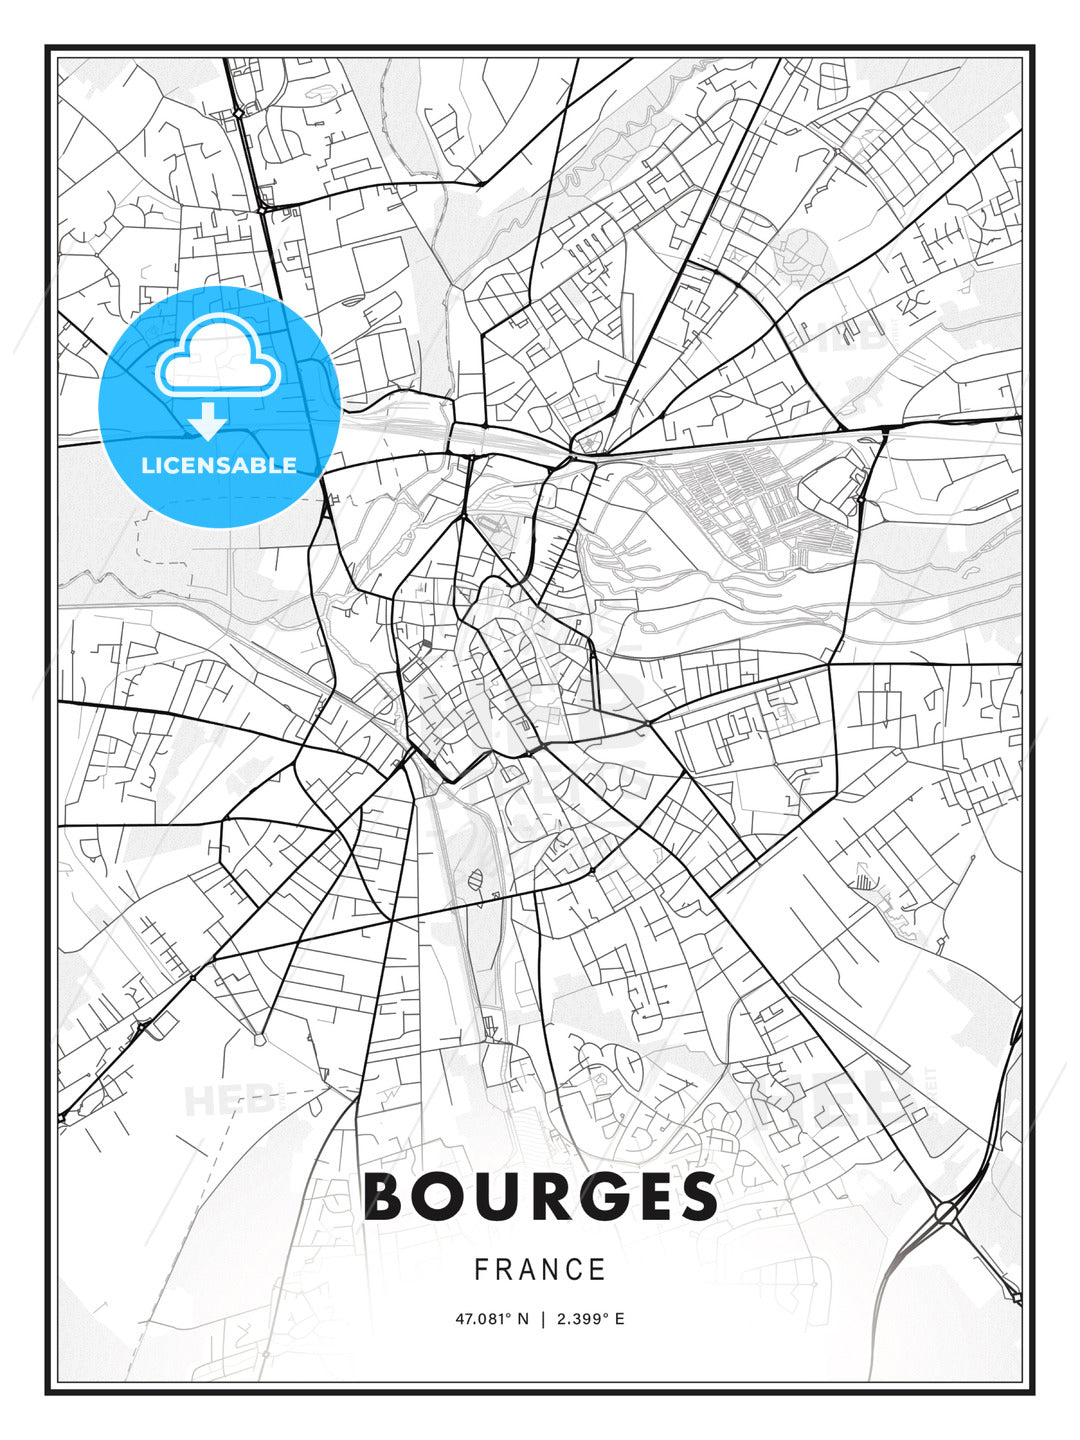 Bourges, France, Modern Print Template in Various Formats - HEBSTREITS Sketches